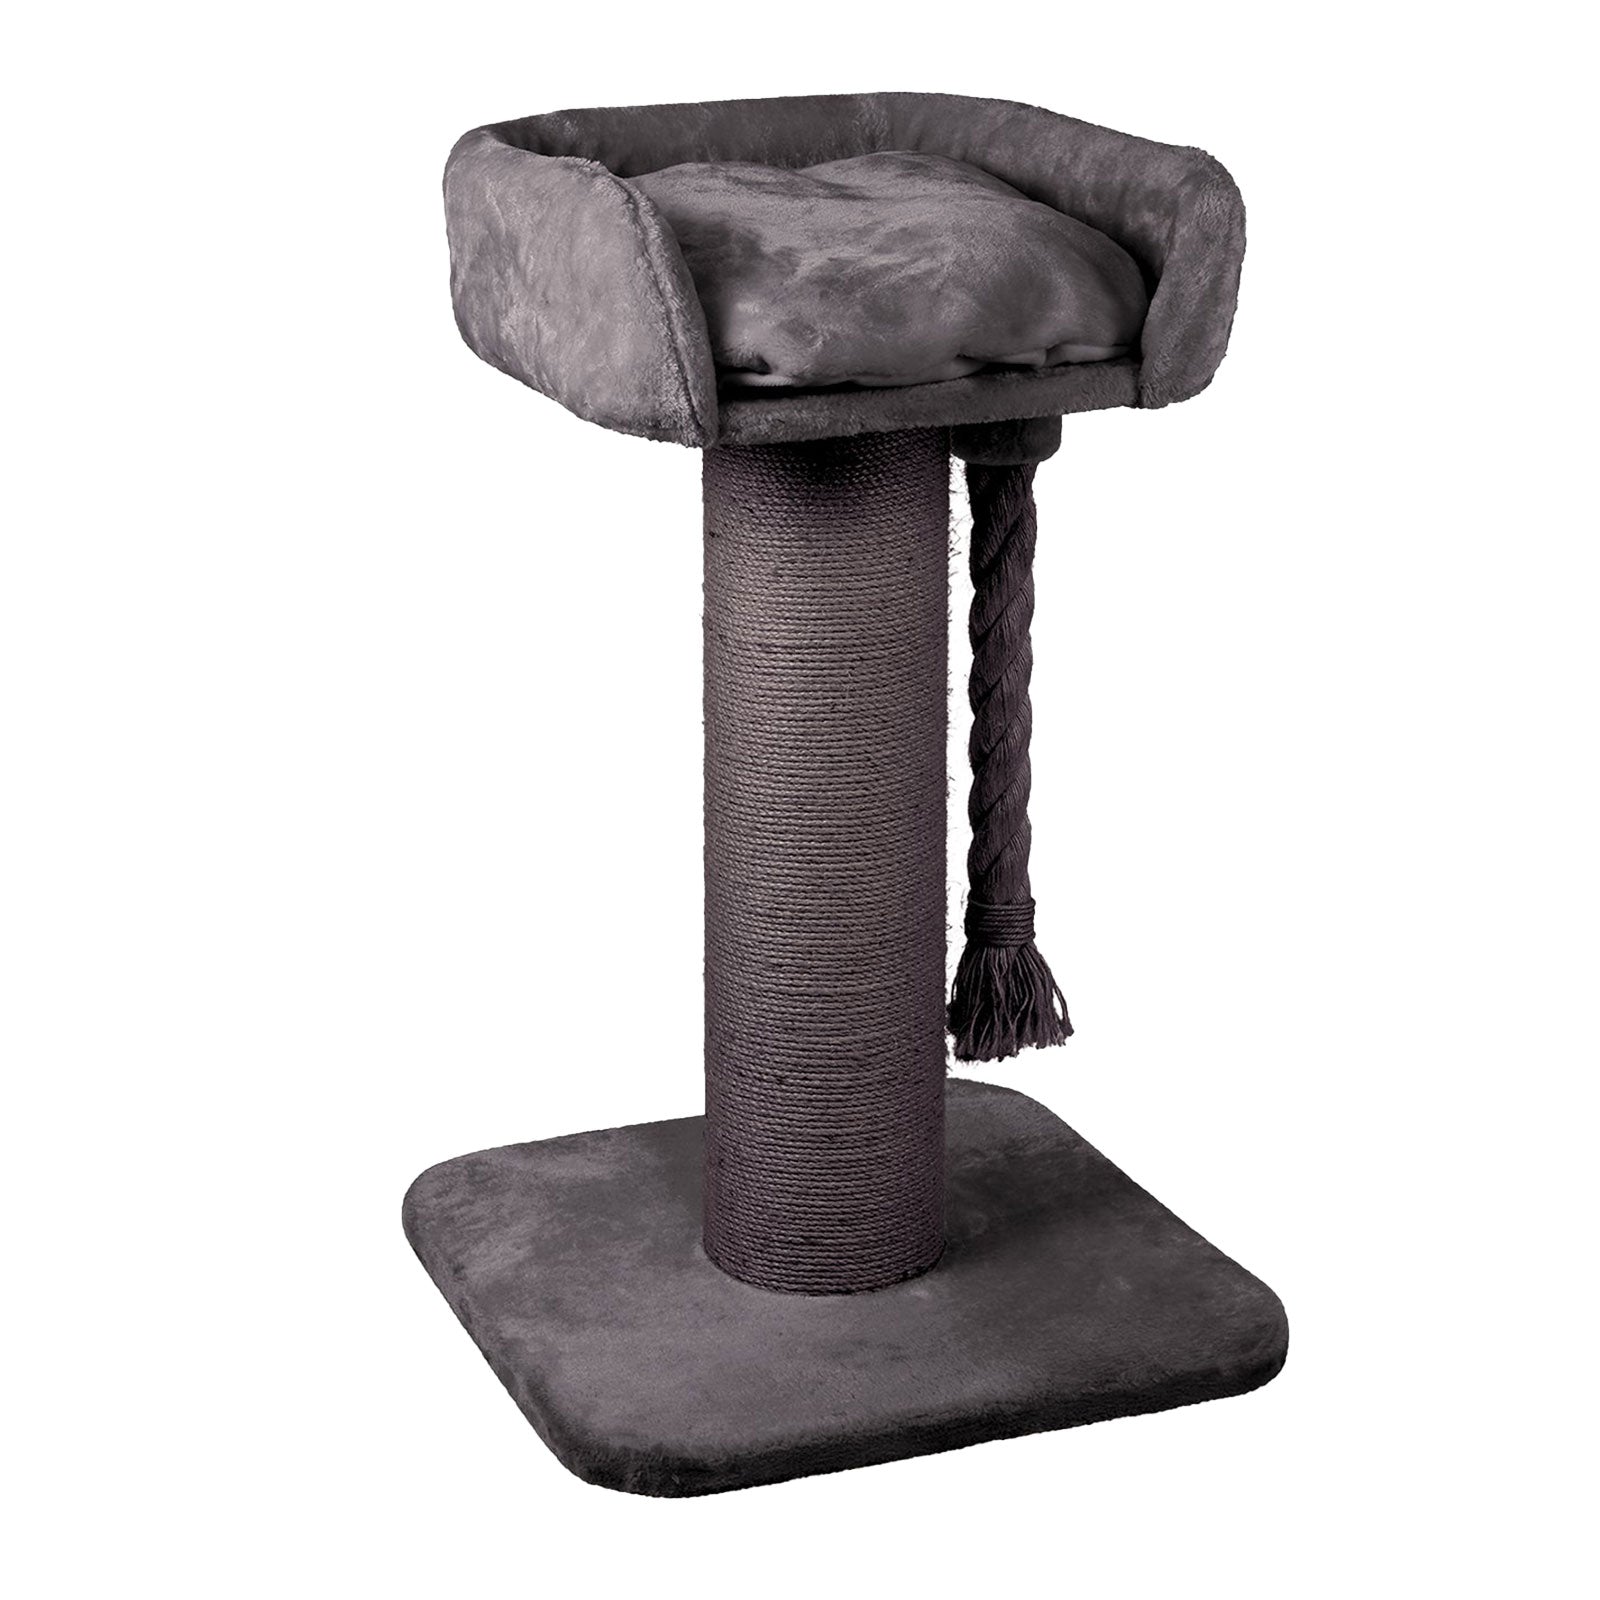 Kazoo Cat Scratcher - High Bed Post w/ Rope Charcoal